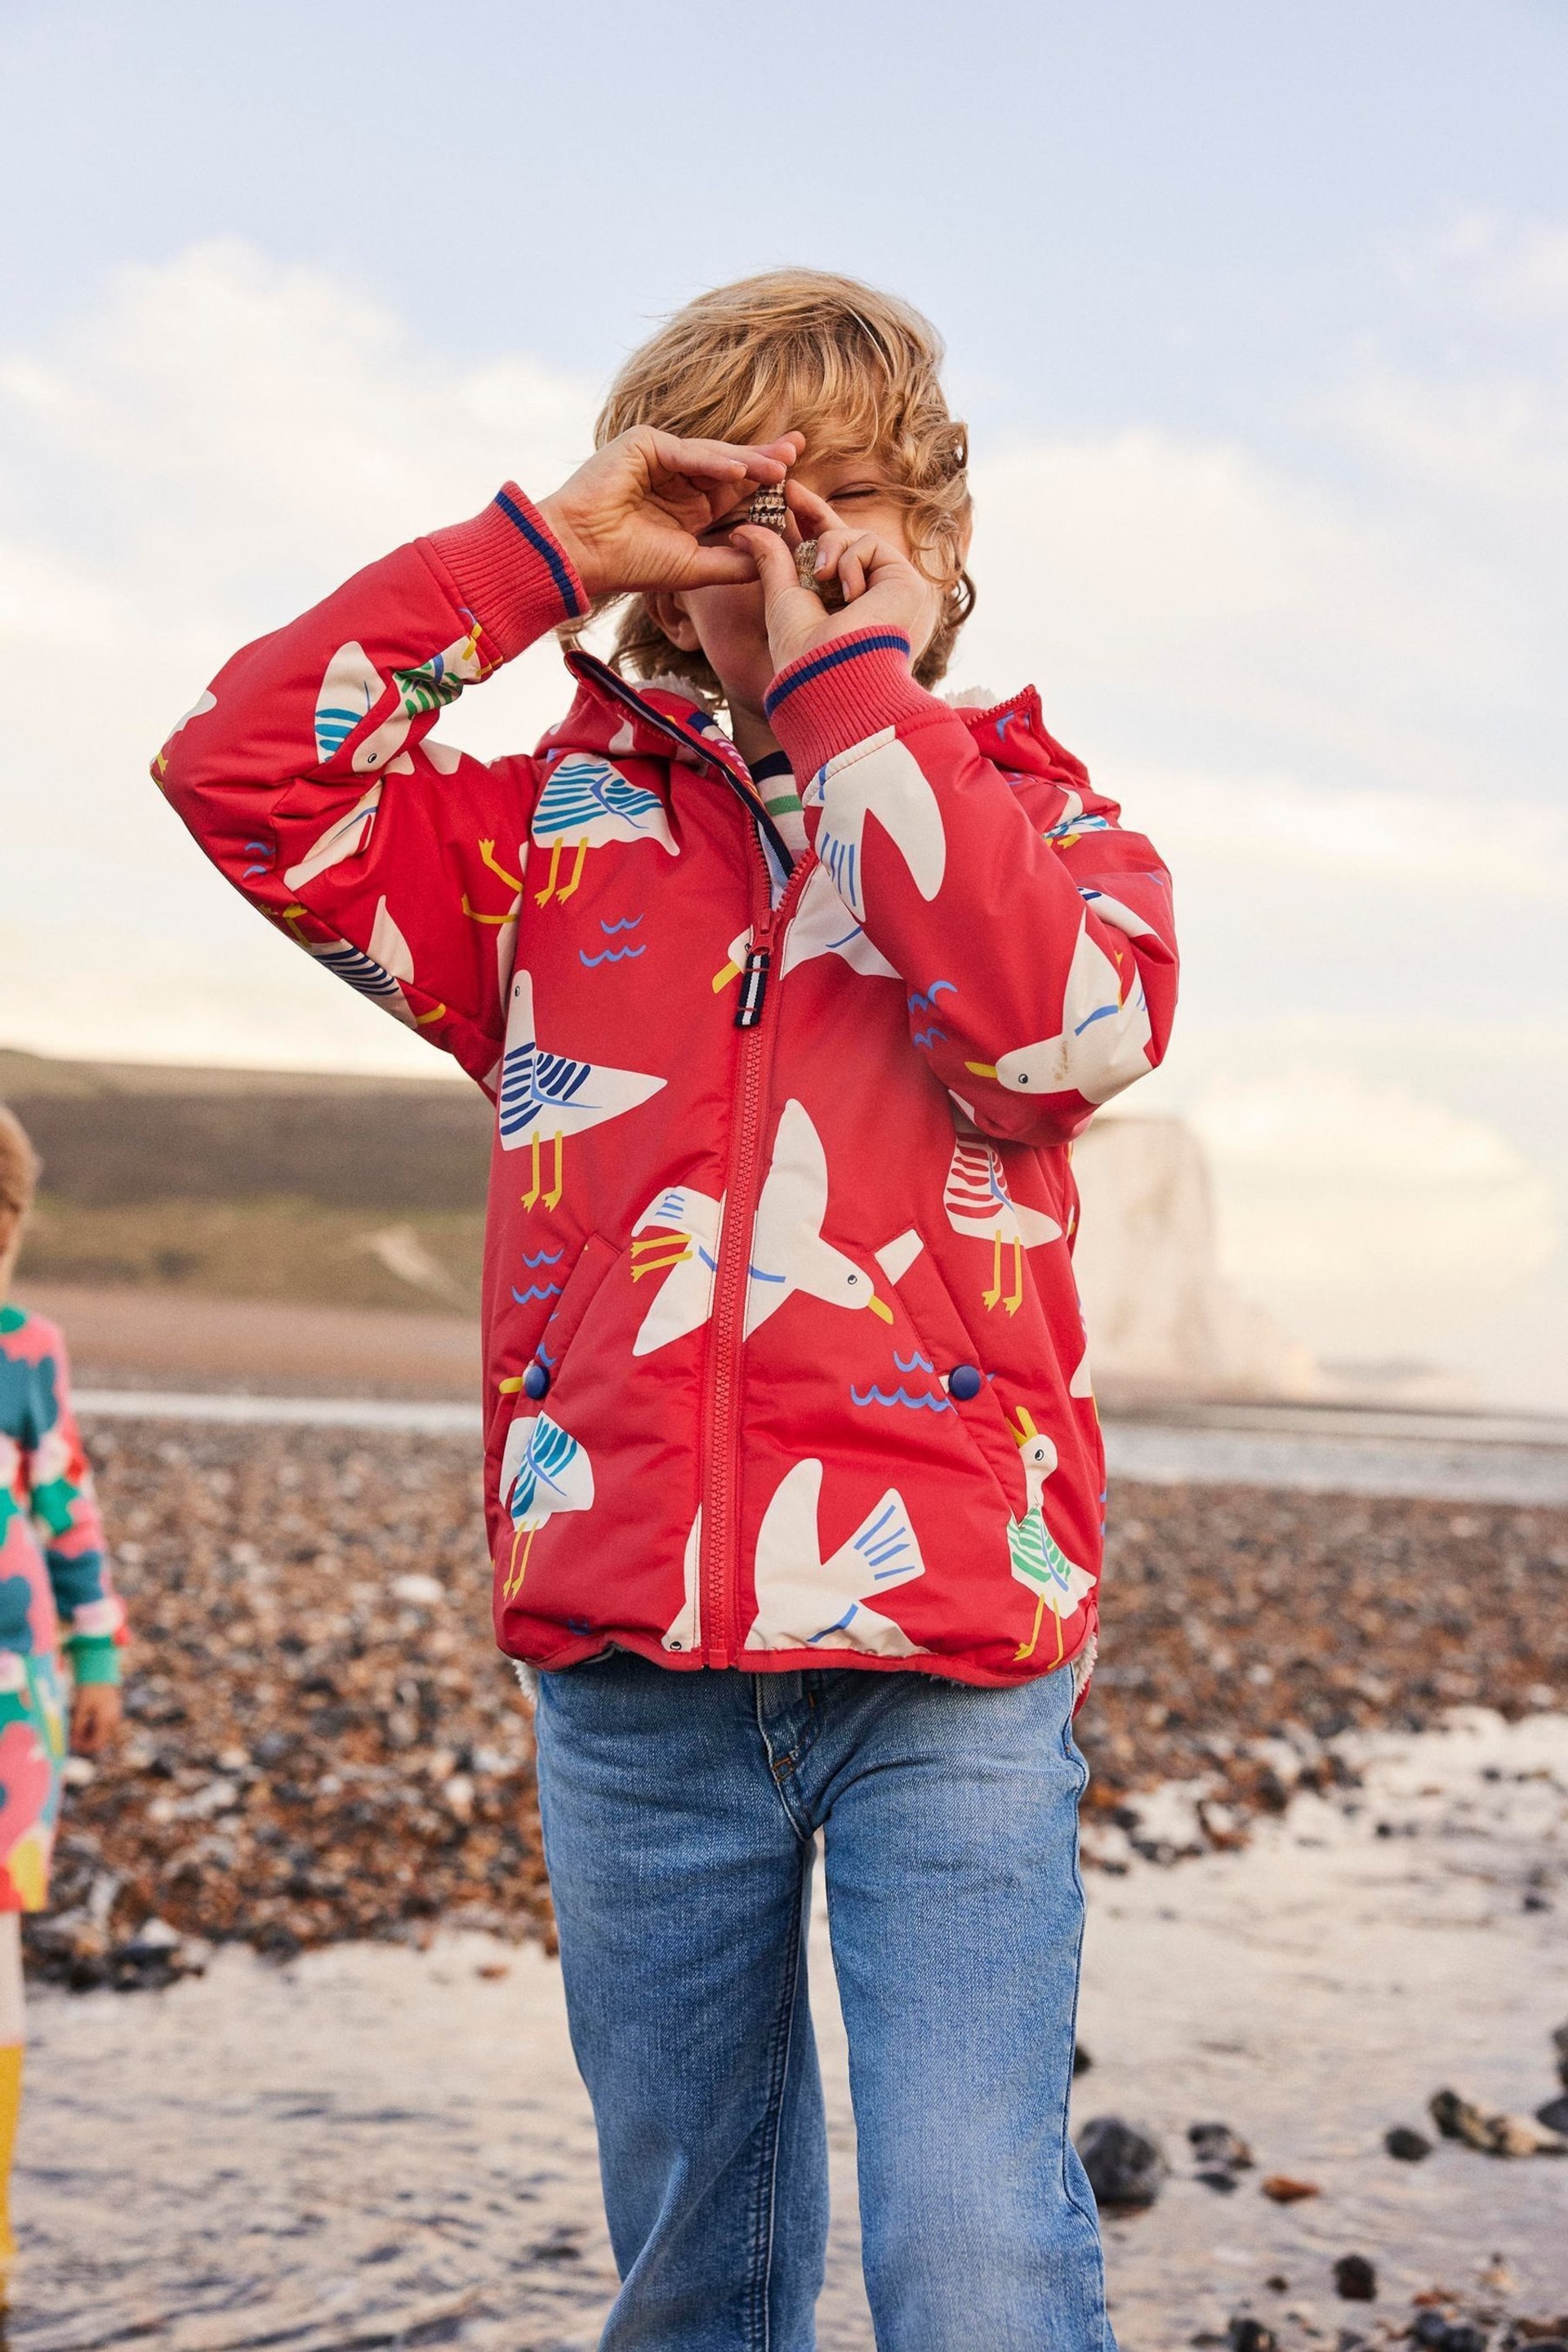 Boden Red Seagull Sherpa Lined Anorak - Image 1 of 5